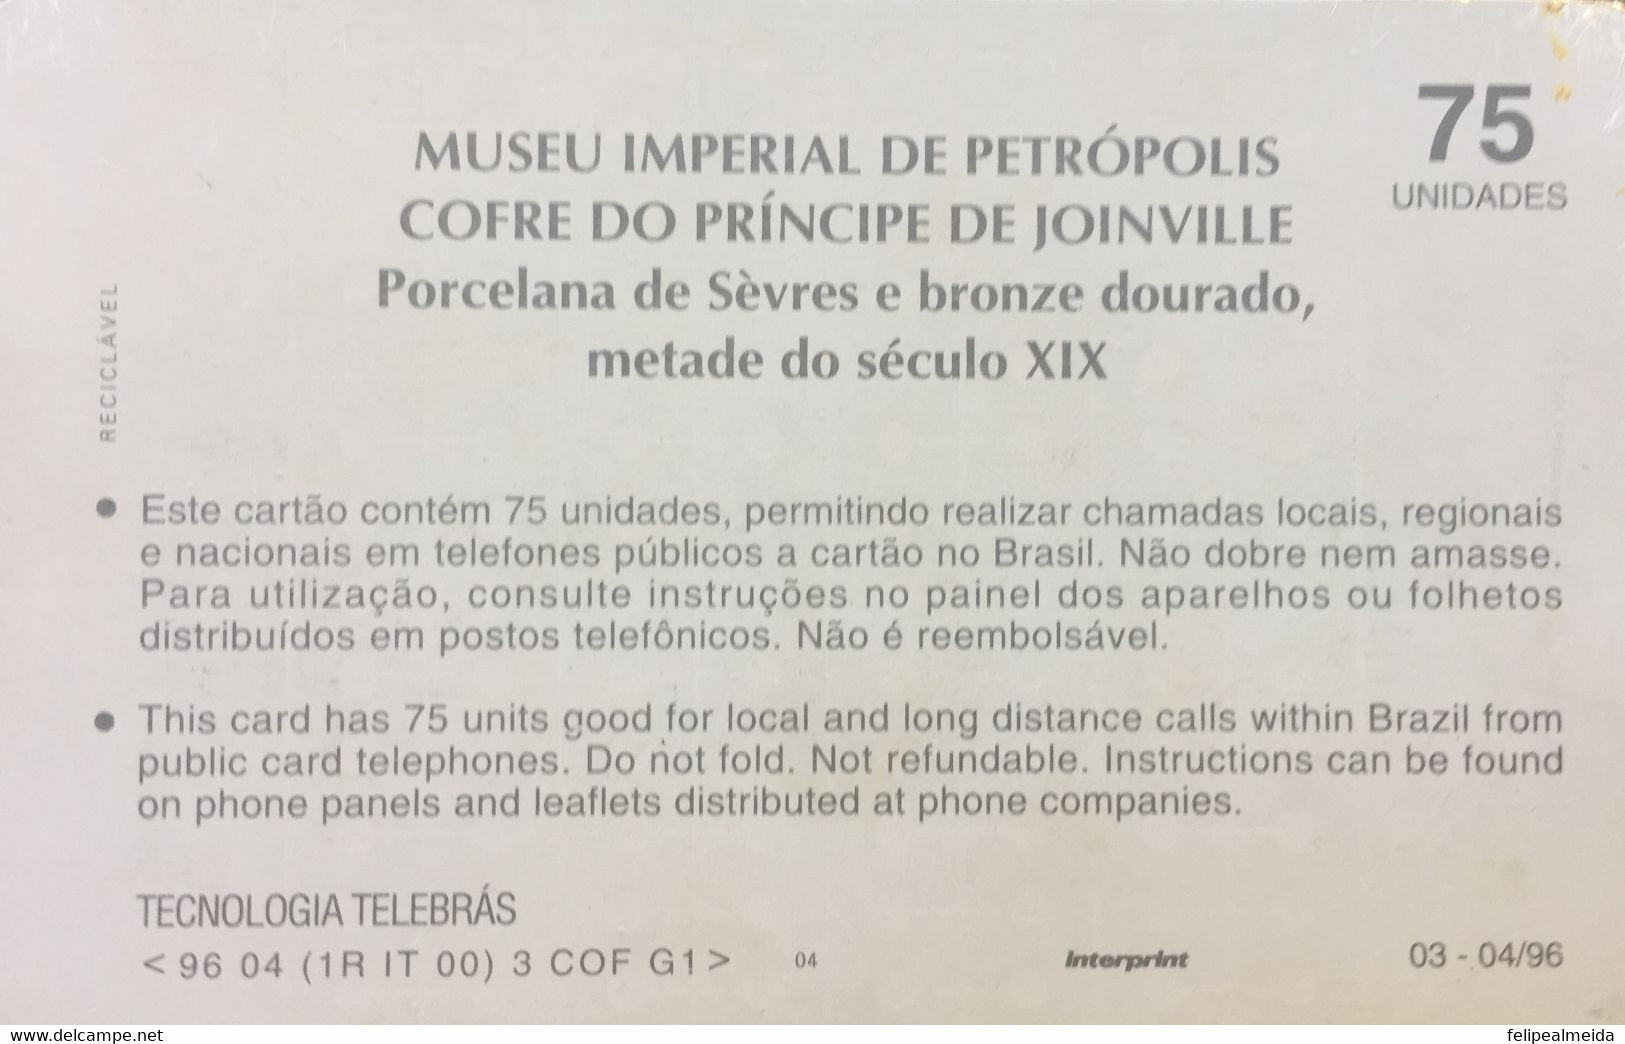 Phone Card Manufactured By Telebras In 1996 - Series Museums - Imperial Museum Of Pretrópolis - Coffer Of The Prince Of - Cultura